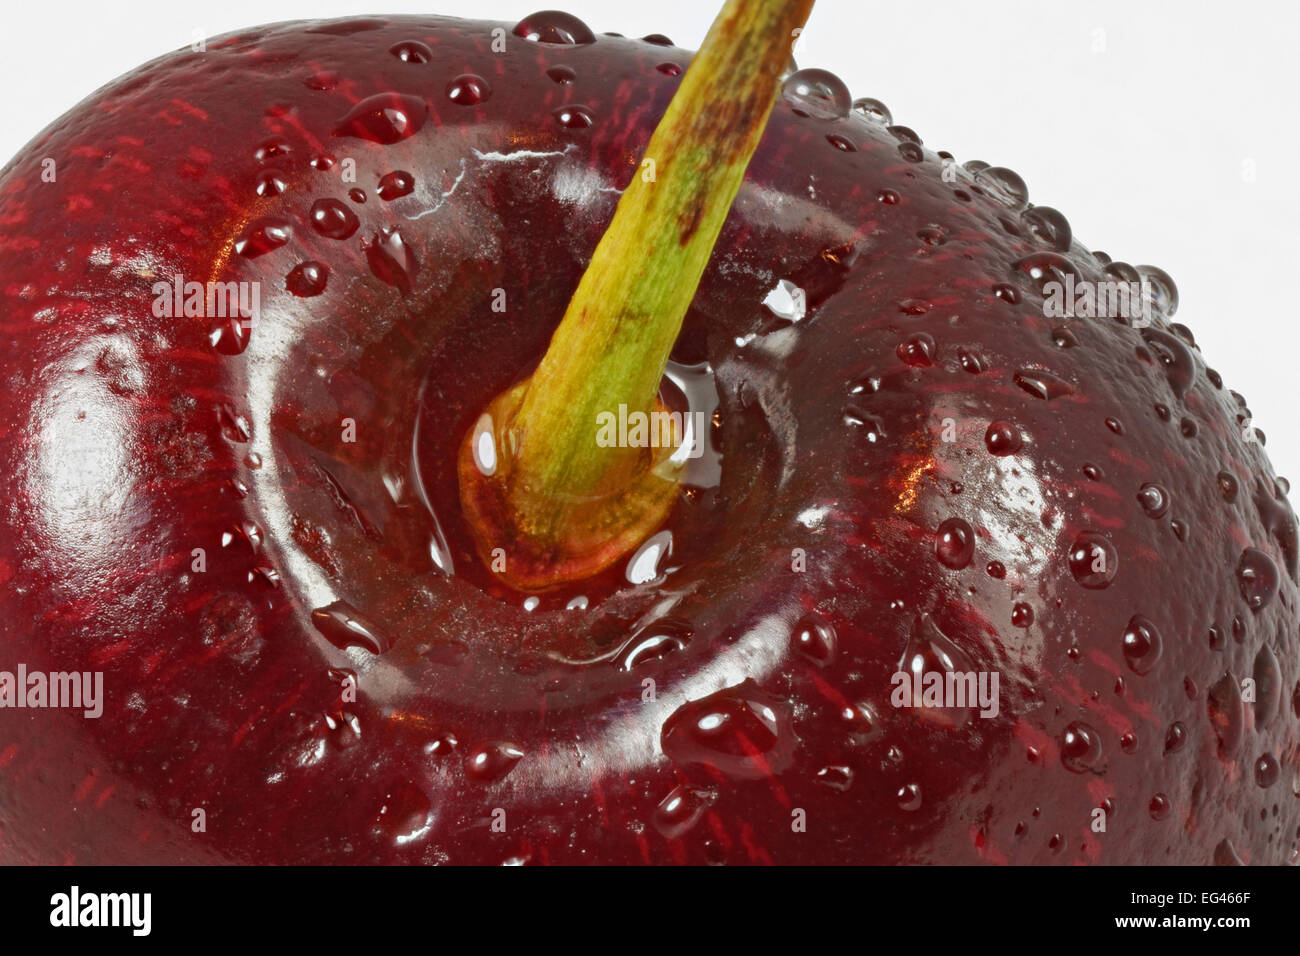 Super-macro of one red cherry with water droplets. A cherry is the fruit of many plants of the genus Prunus and is a fleshy drupe (stone fruit). Stock Photo